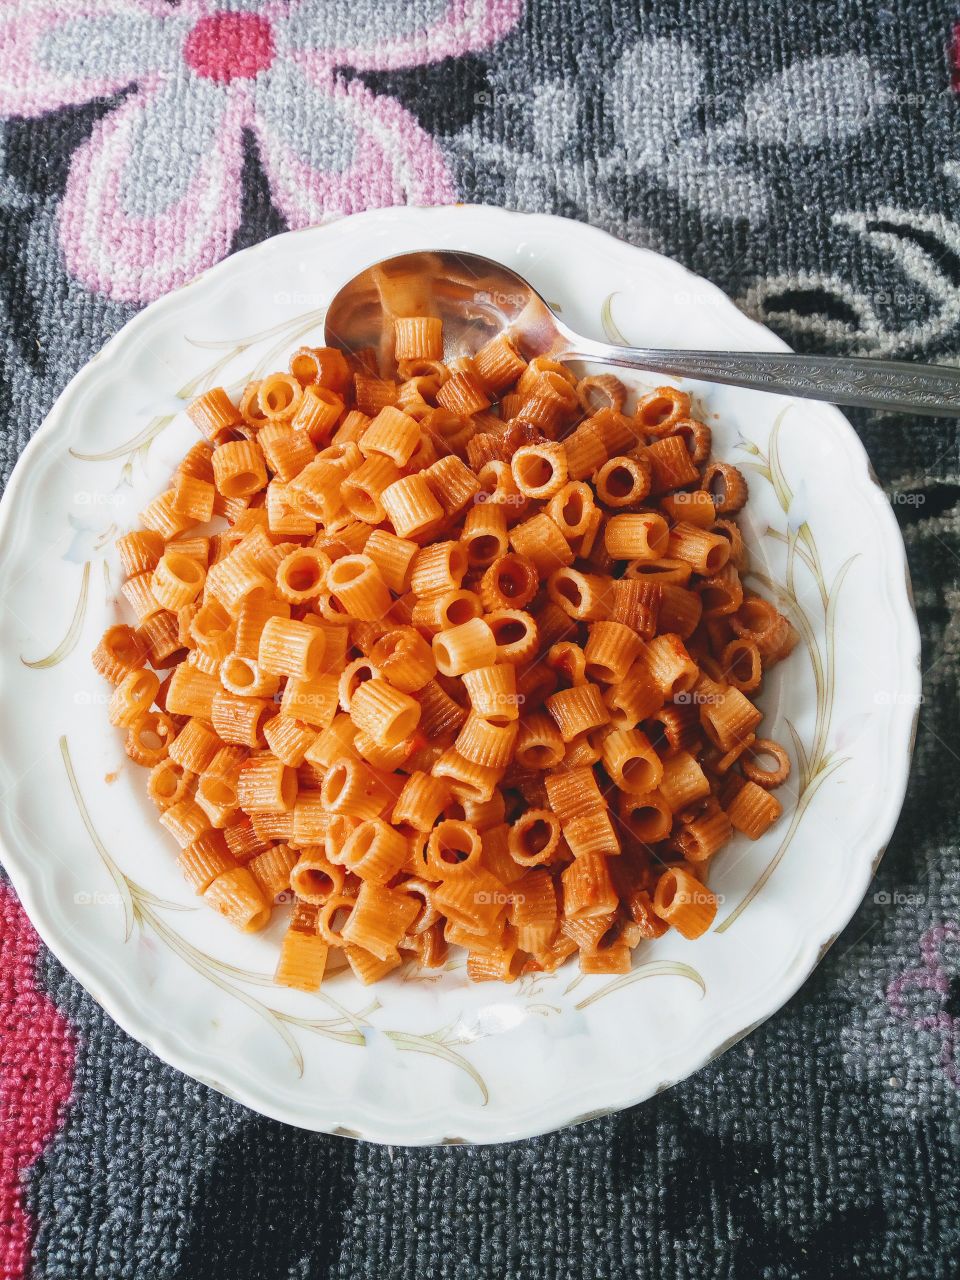 Cooked pasta with warm sauce